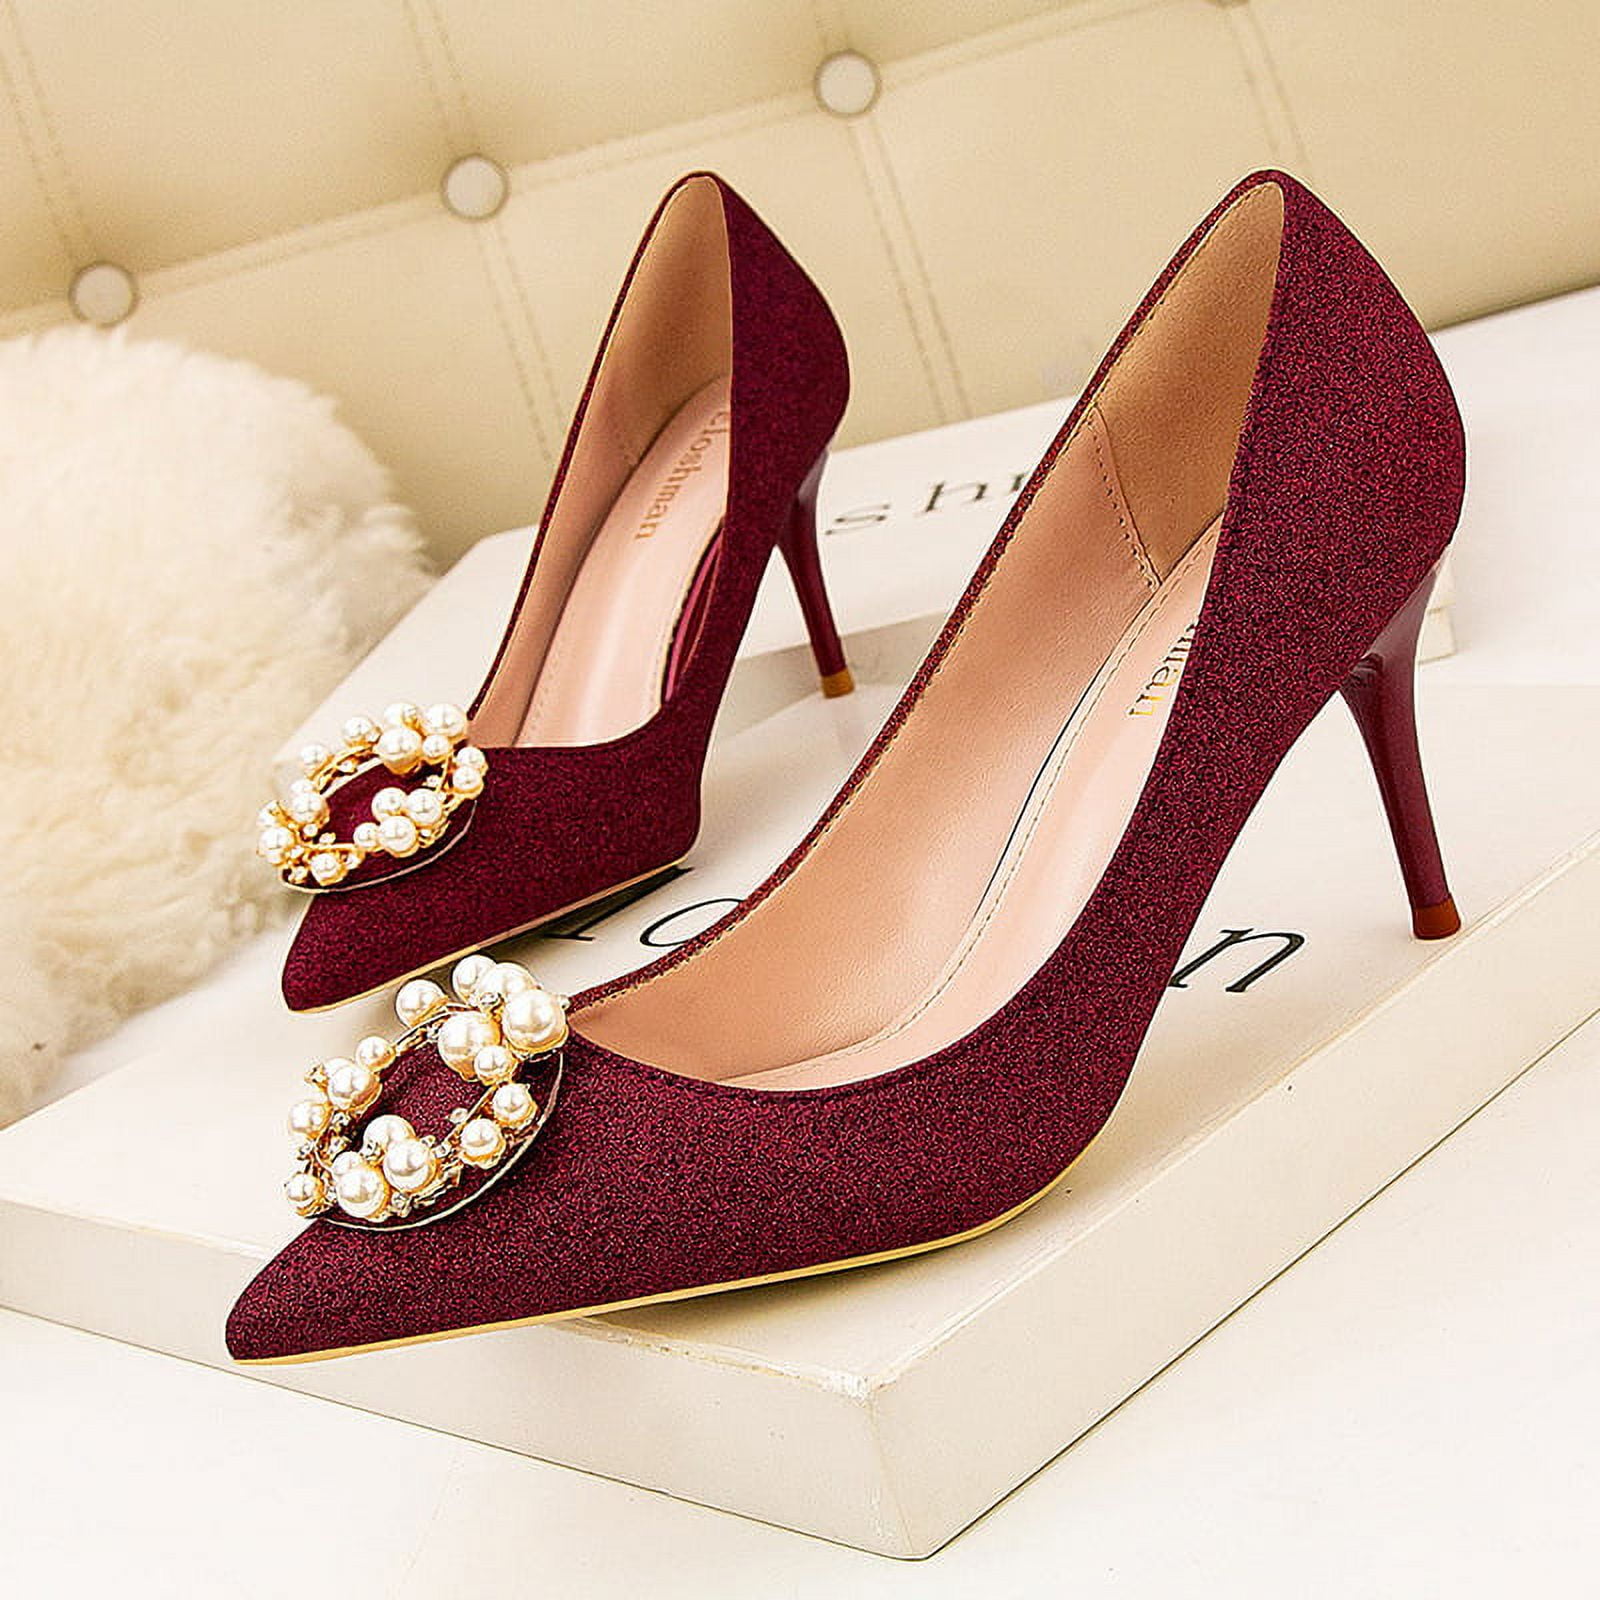 Korean Style Sweet Bow Stiletto High Heel High Heels Shallow Pointed Toe  Shoes | eBay